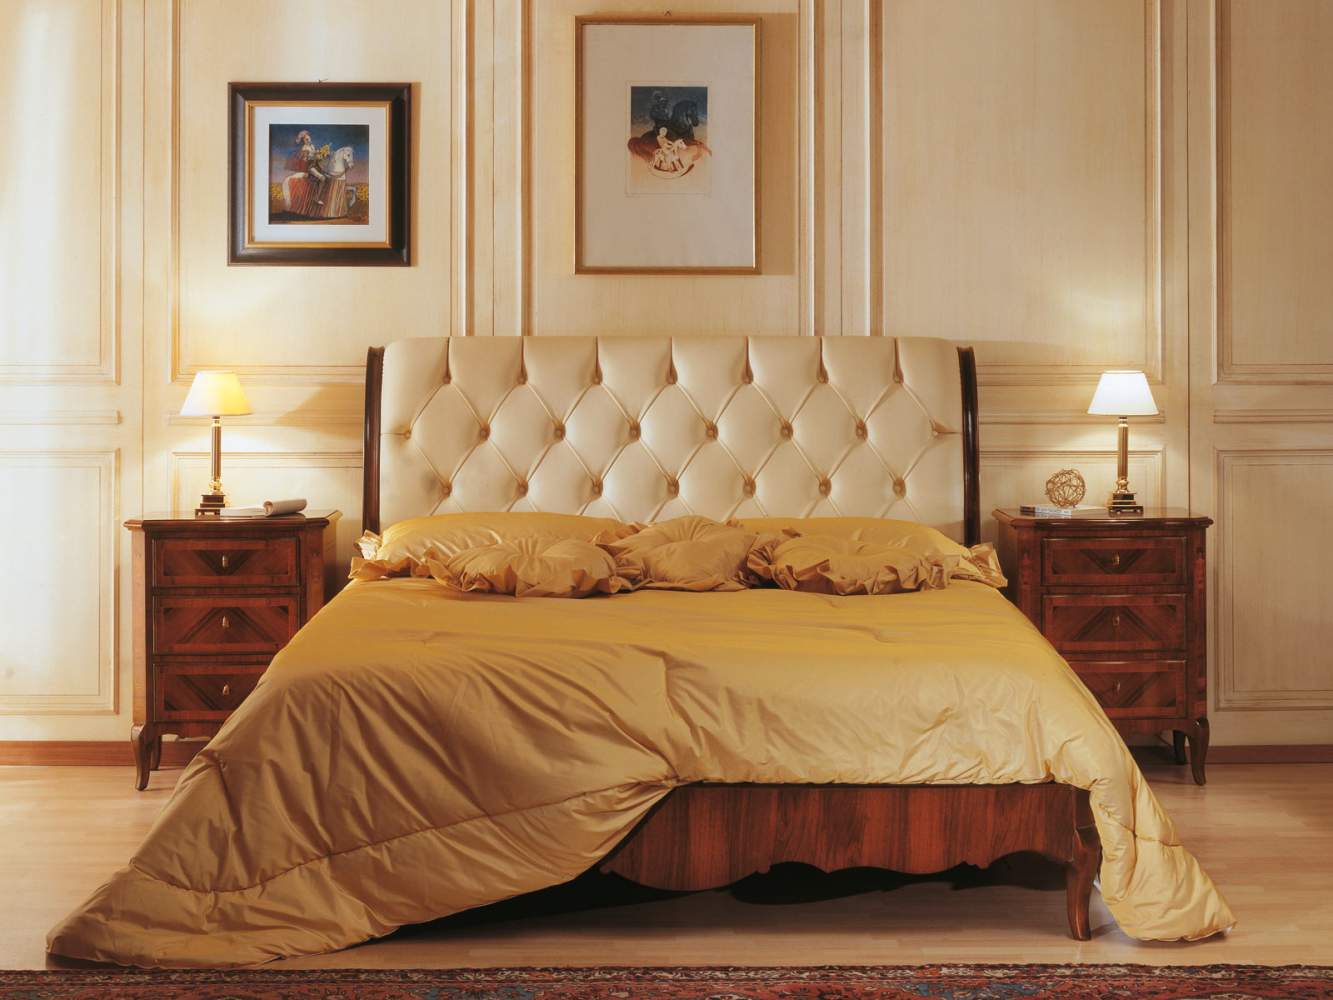 Classic luxury 19th century french bedroom, bed in capitonnè leather